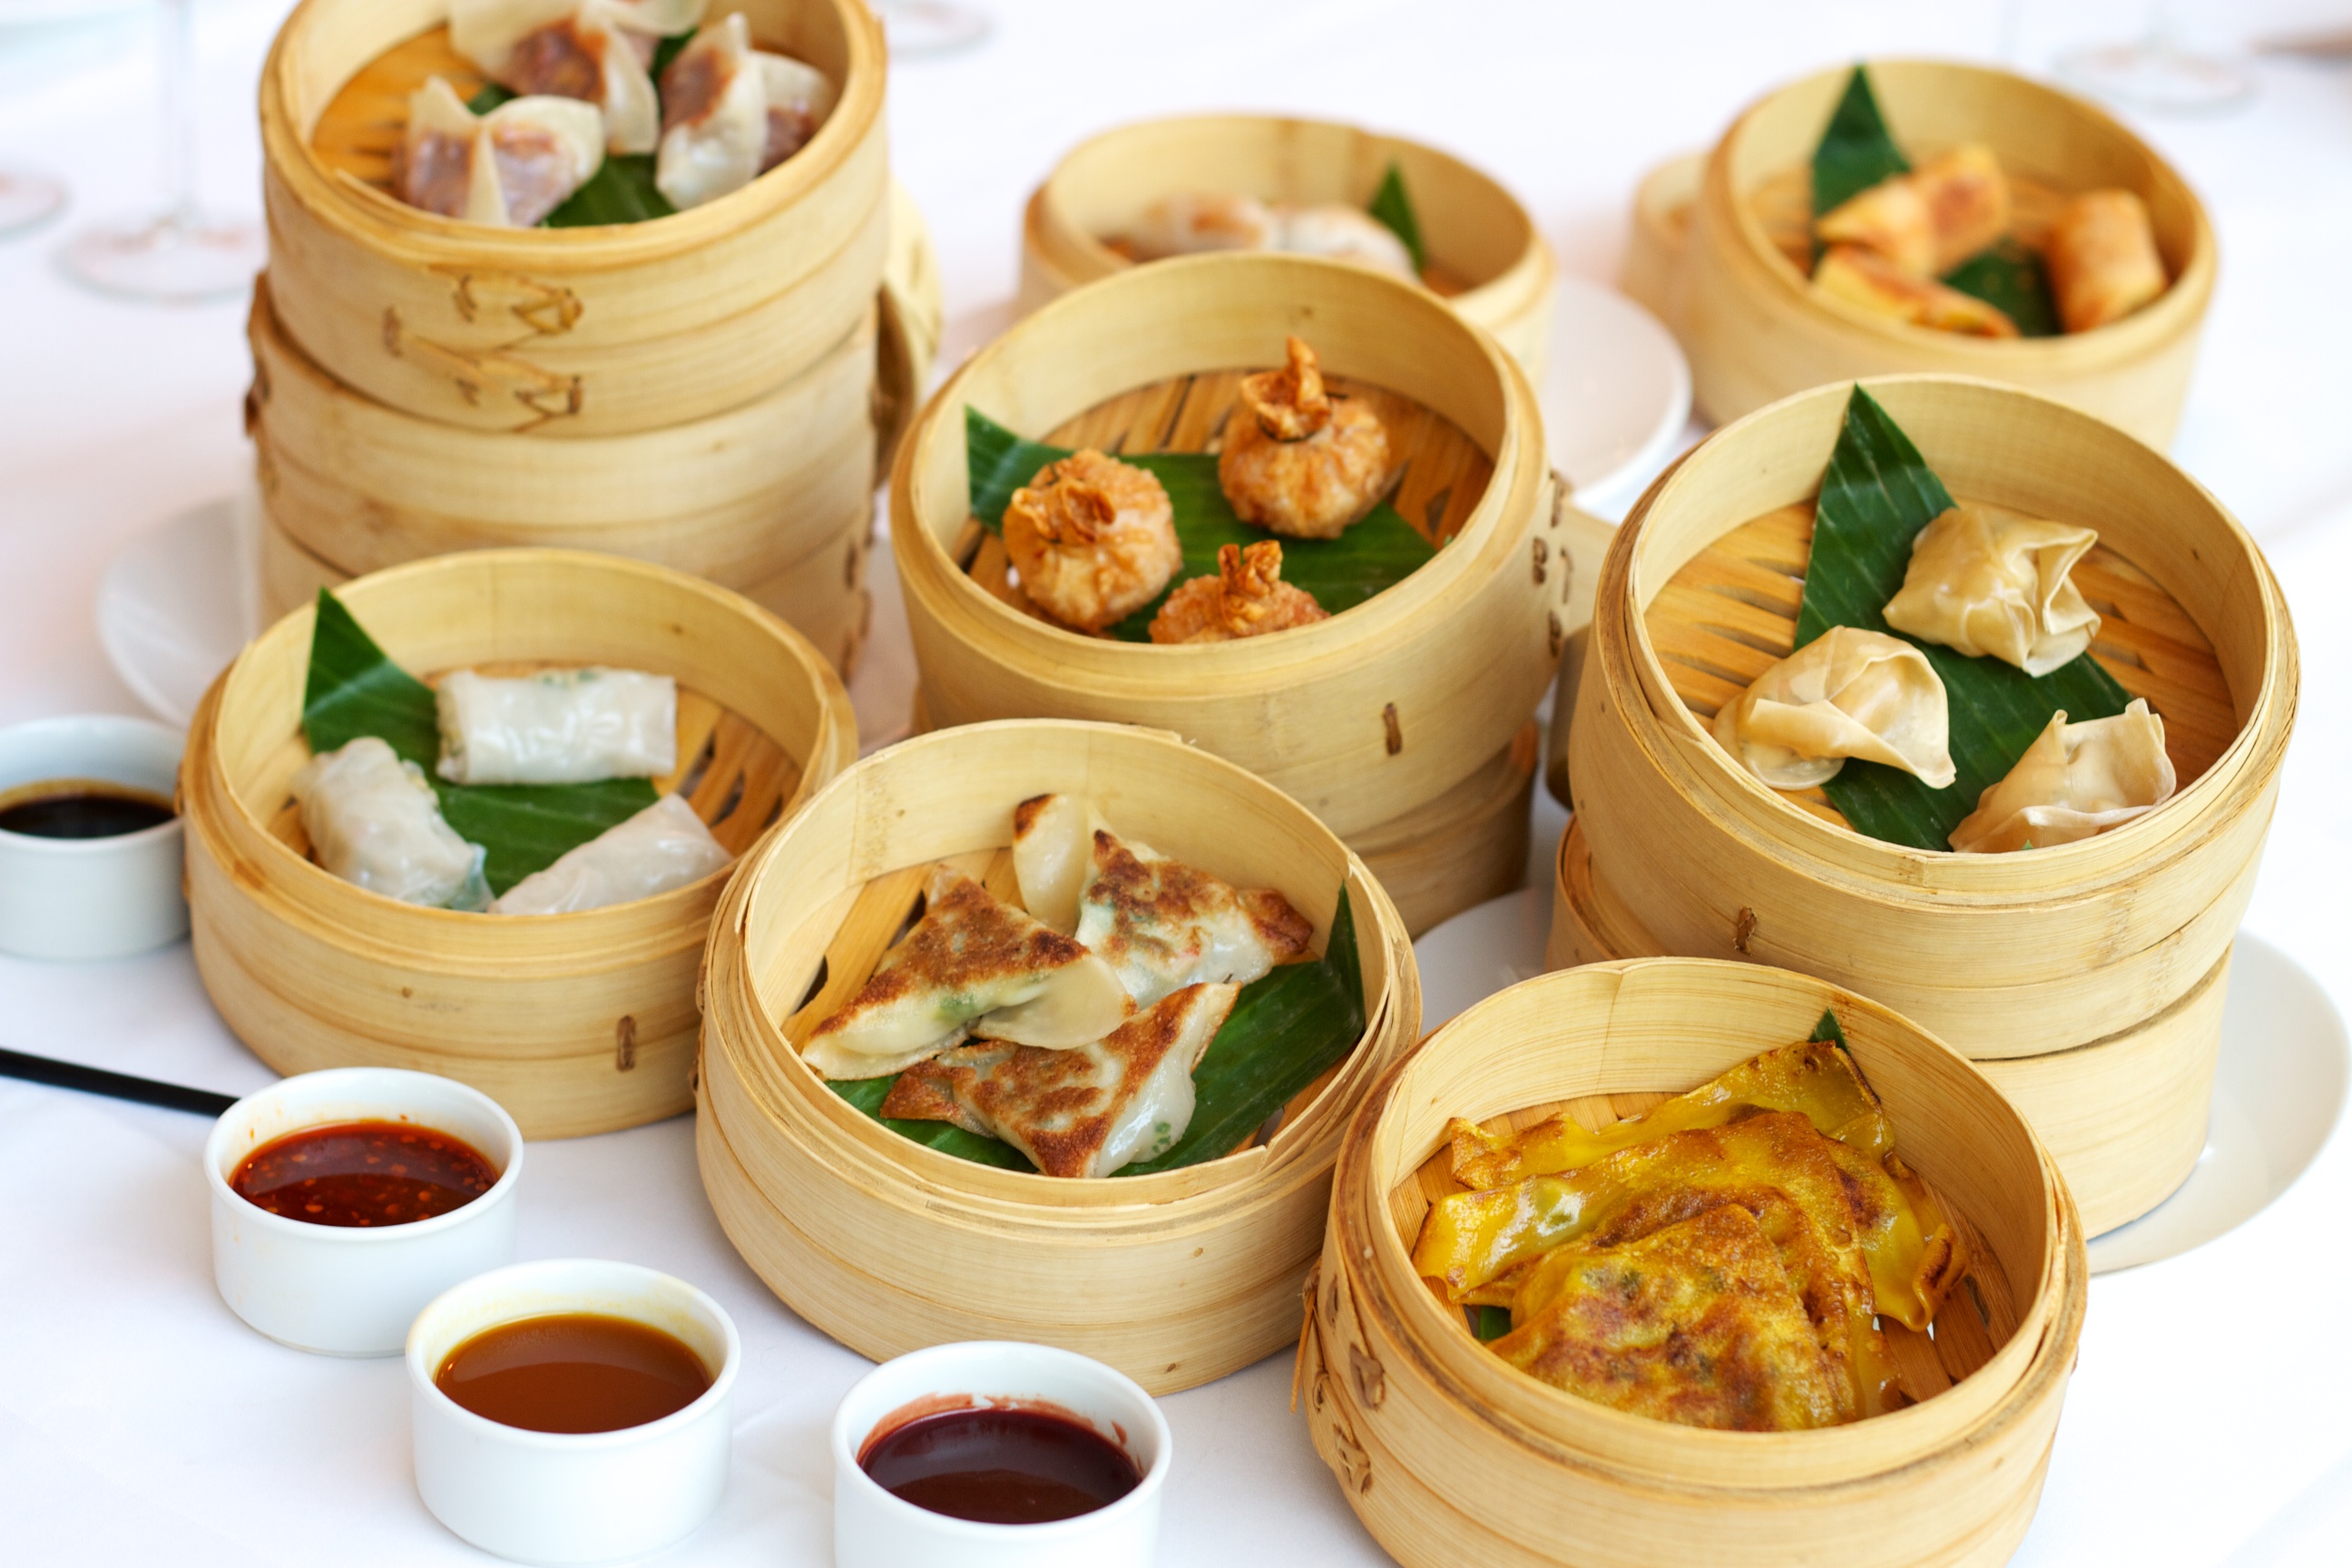 Authentic Hong Kong Style Dim Sum at affordable prices at Gourmet's Delight